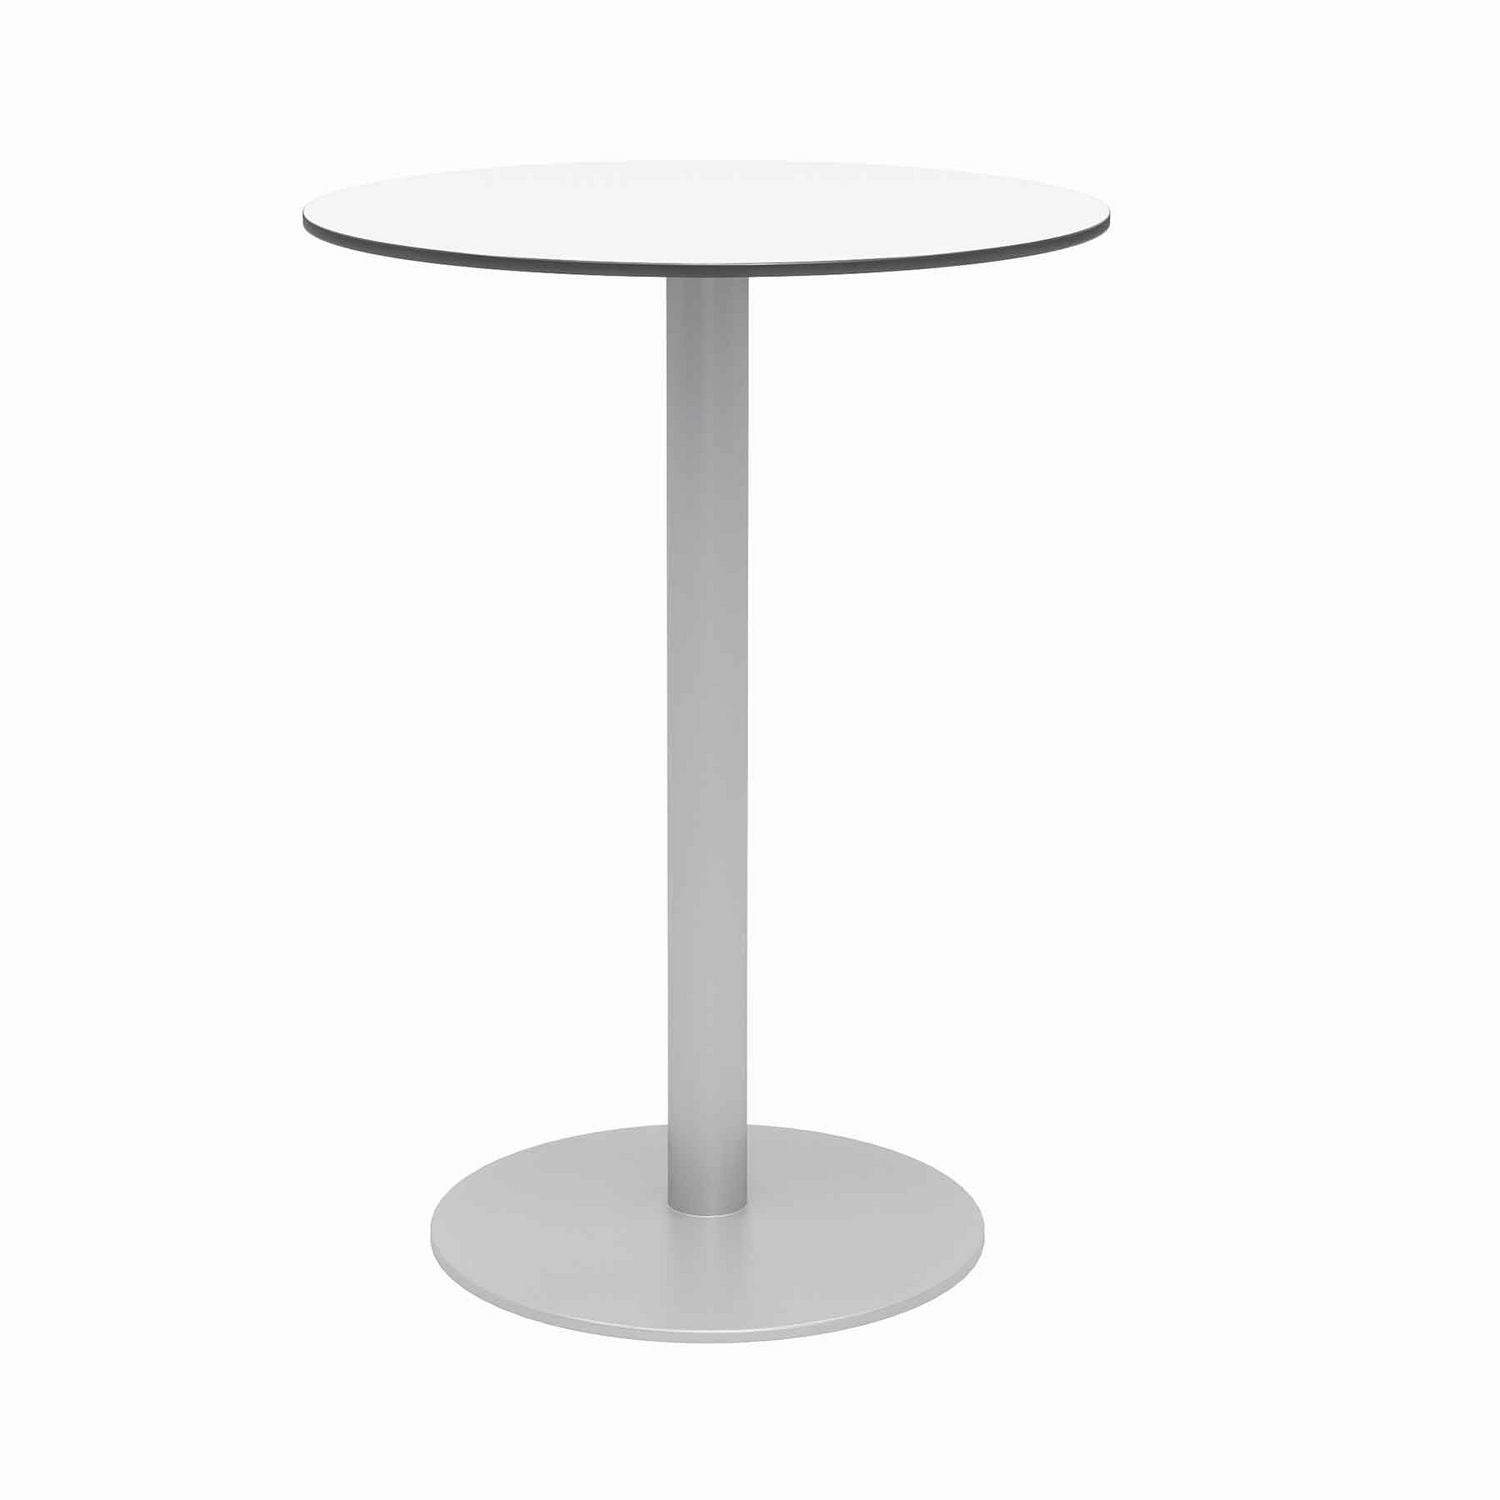 eveleen-outdoor-bistro-patio-table-2-gray-powder-coated-polymer-barstools-round-30-dia-x-41h-whiteships-in-4-6-bus-days_kfi840031918475 - 2